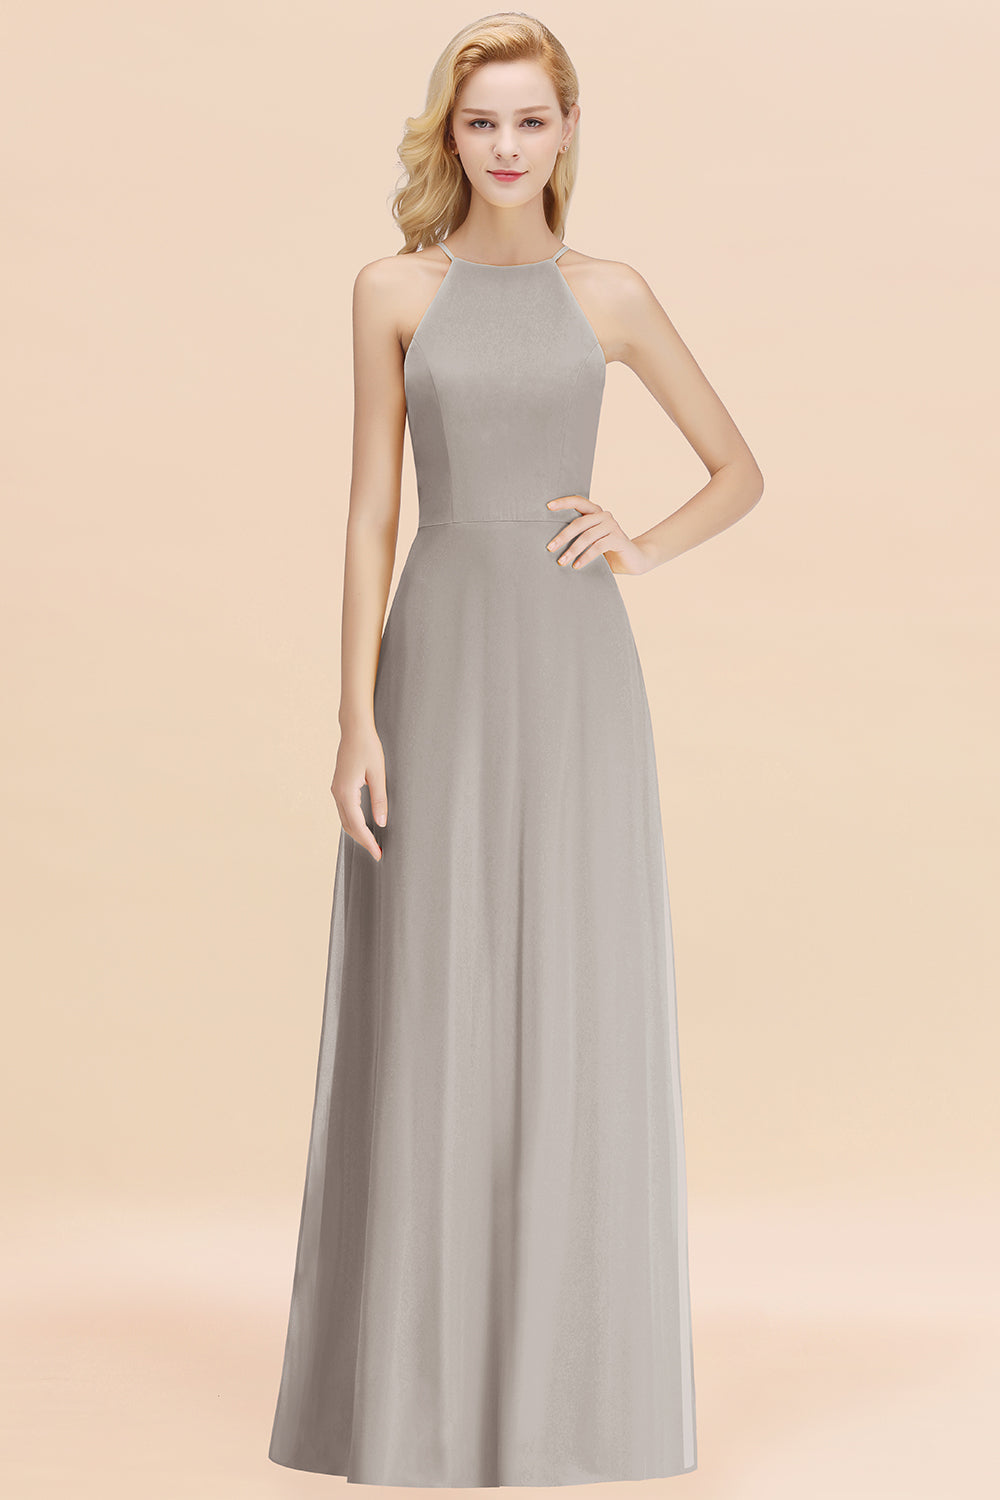 Load image into Gallery viewer, Modest High-Neck Yellow Chiffon Affordable Bridesmaid Dresses Online-27dress
